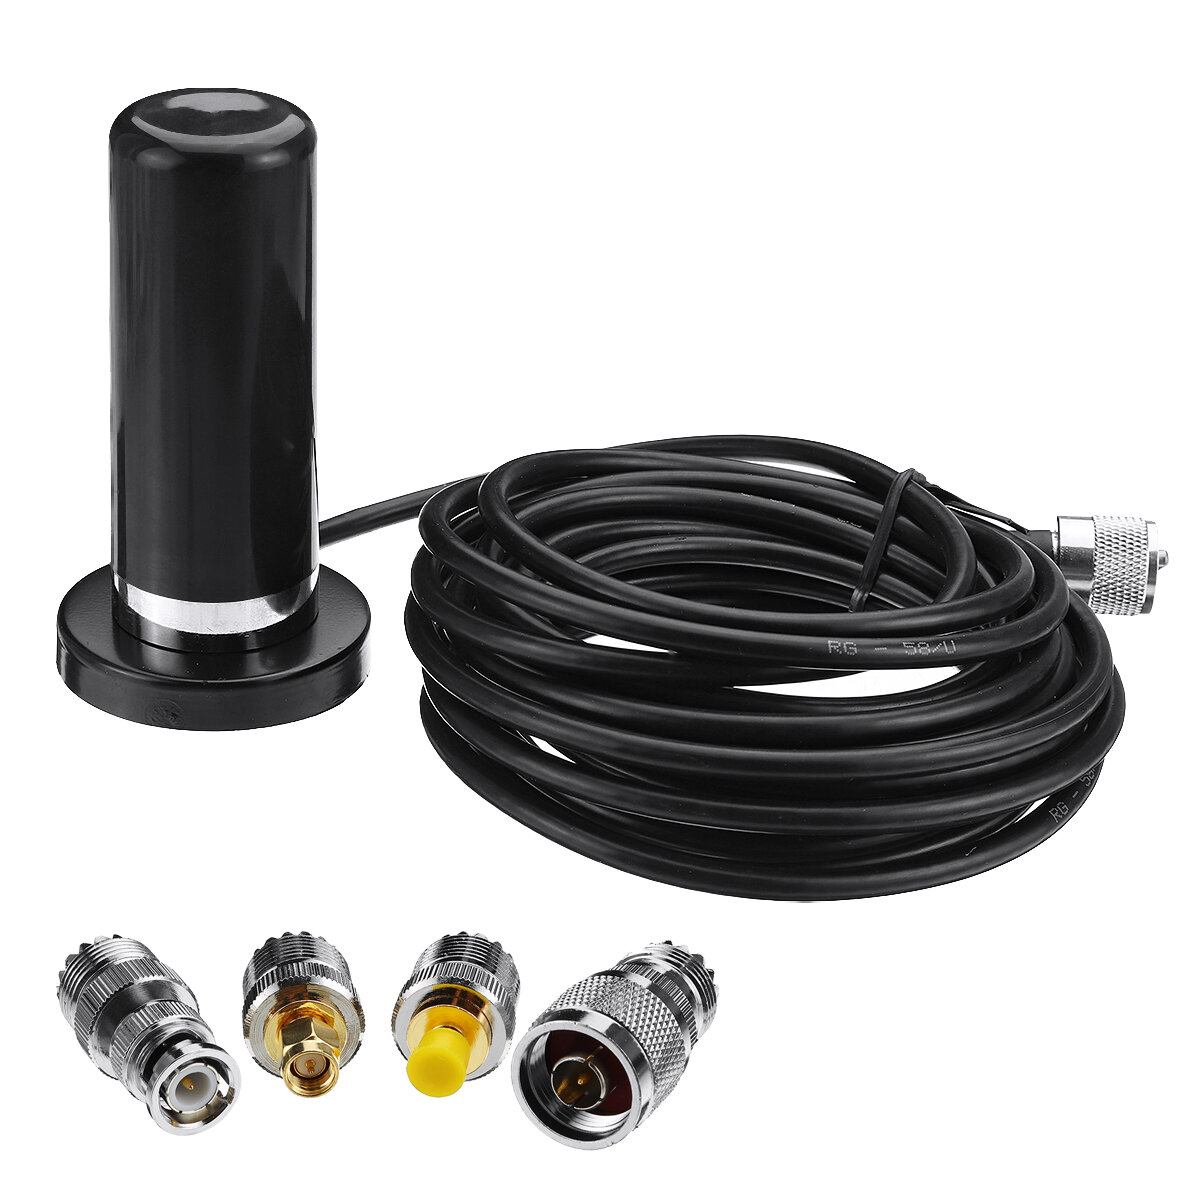 

Car Mobile Radio Dual Band VHF UHF Antenna PL259 5M Coaxial Cable Magnetic Mount Base and SMA-F SMA-M BNC Connector